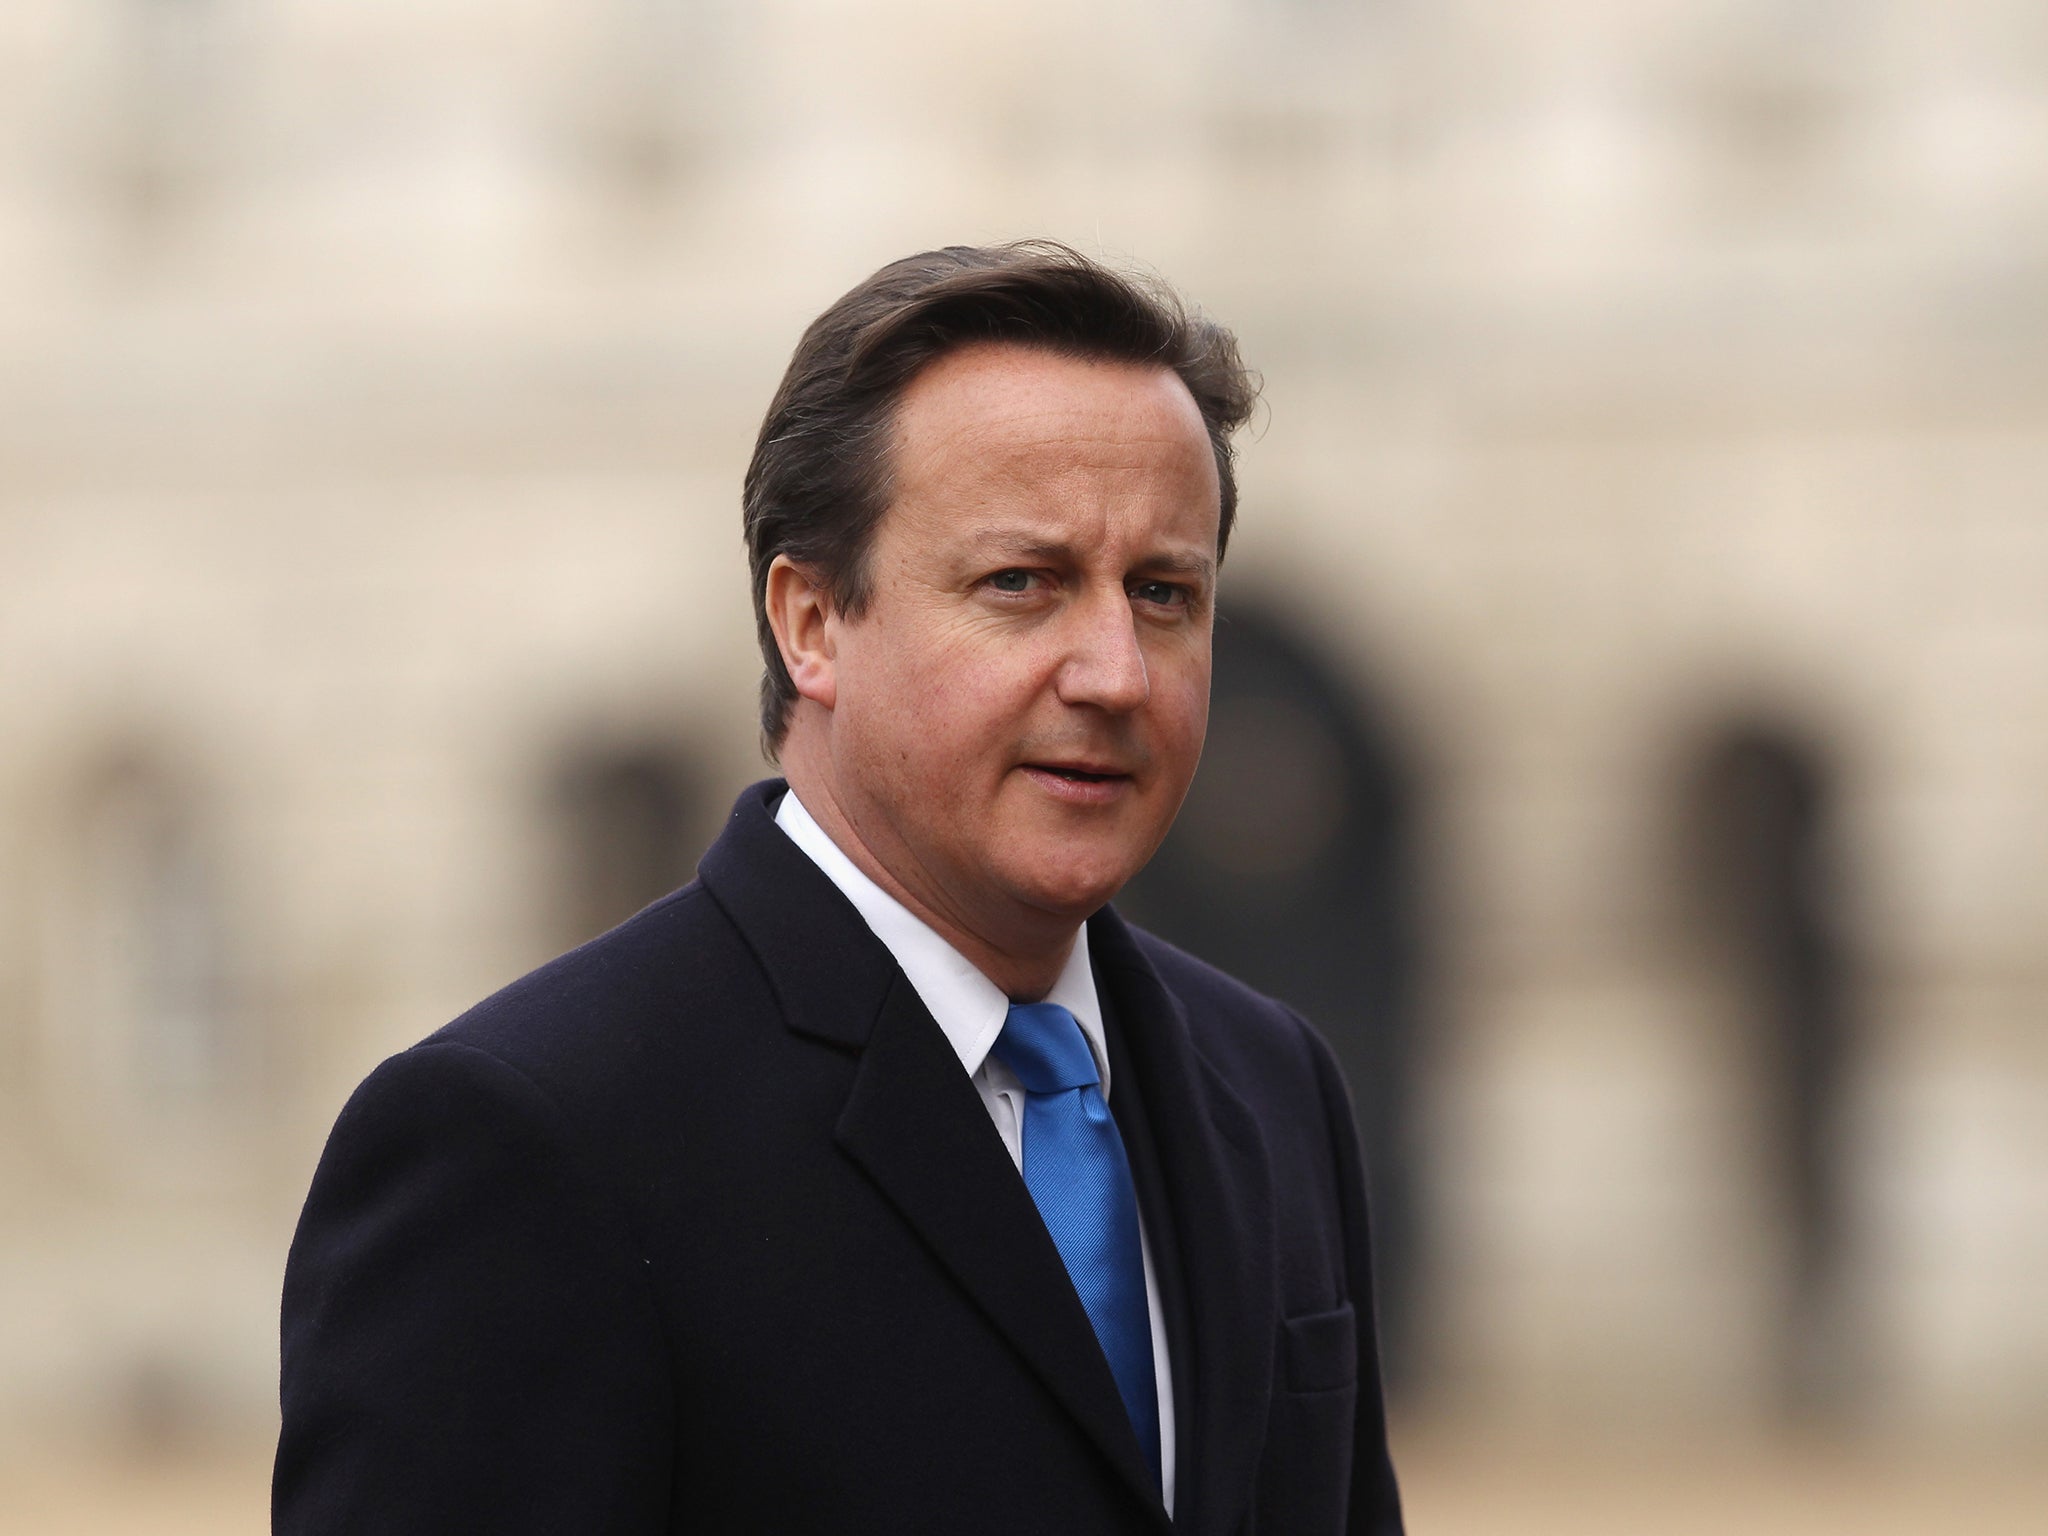 David Cameron said it would be “lovely” if they could “forever” stay at the emergency low